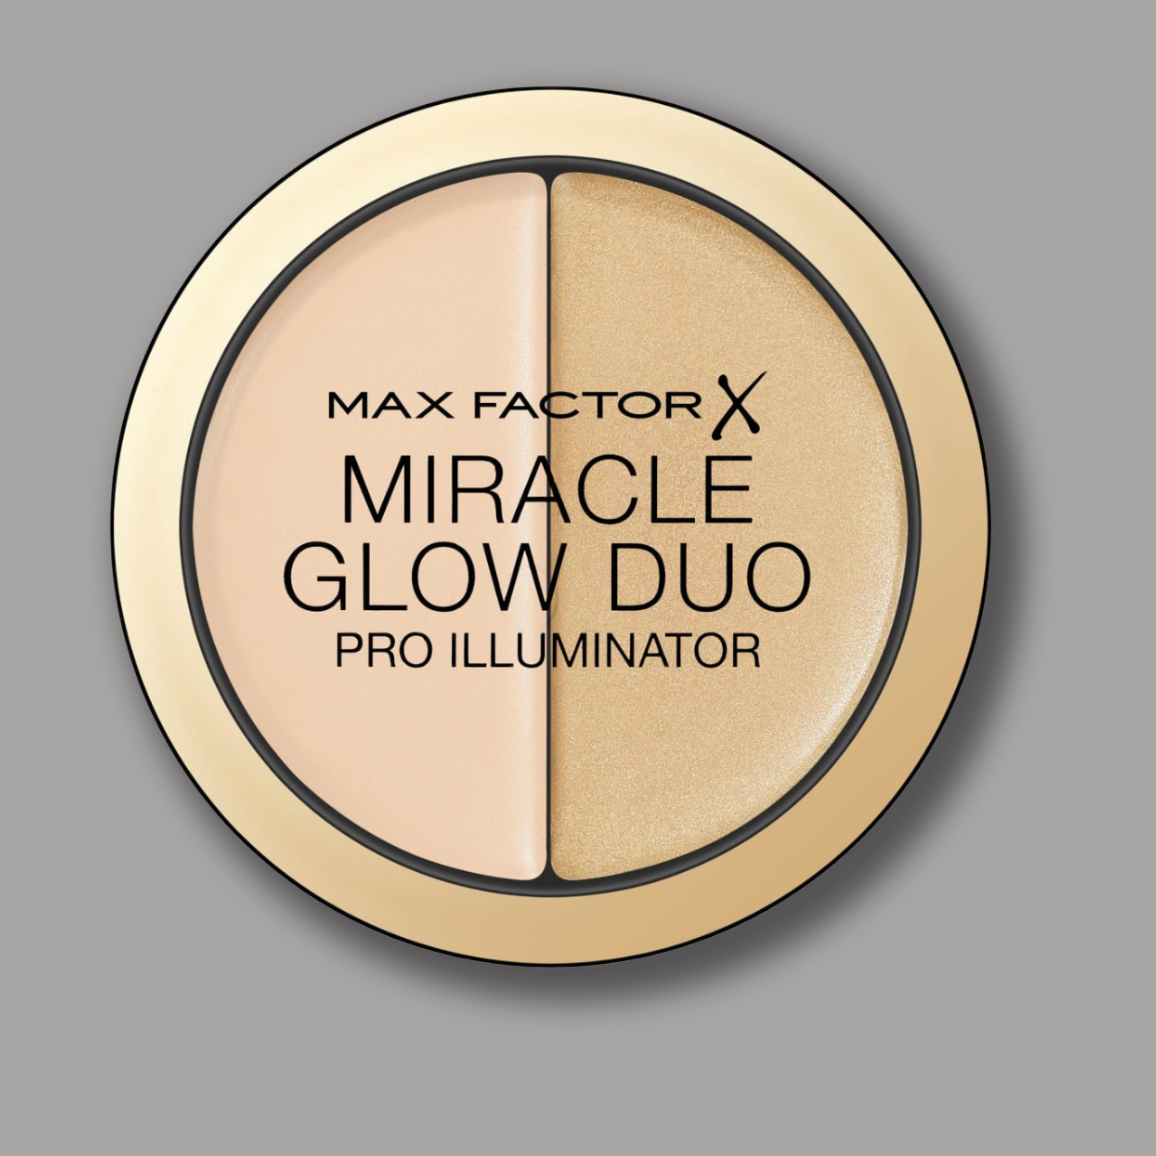 6 x Max Factor Miracle Glow Duo Highlighter - 10 LIGHT